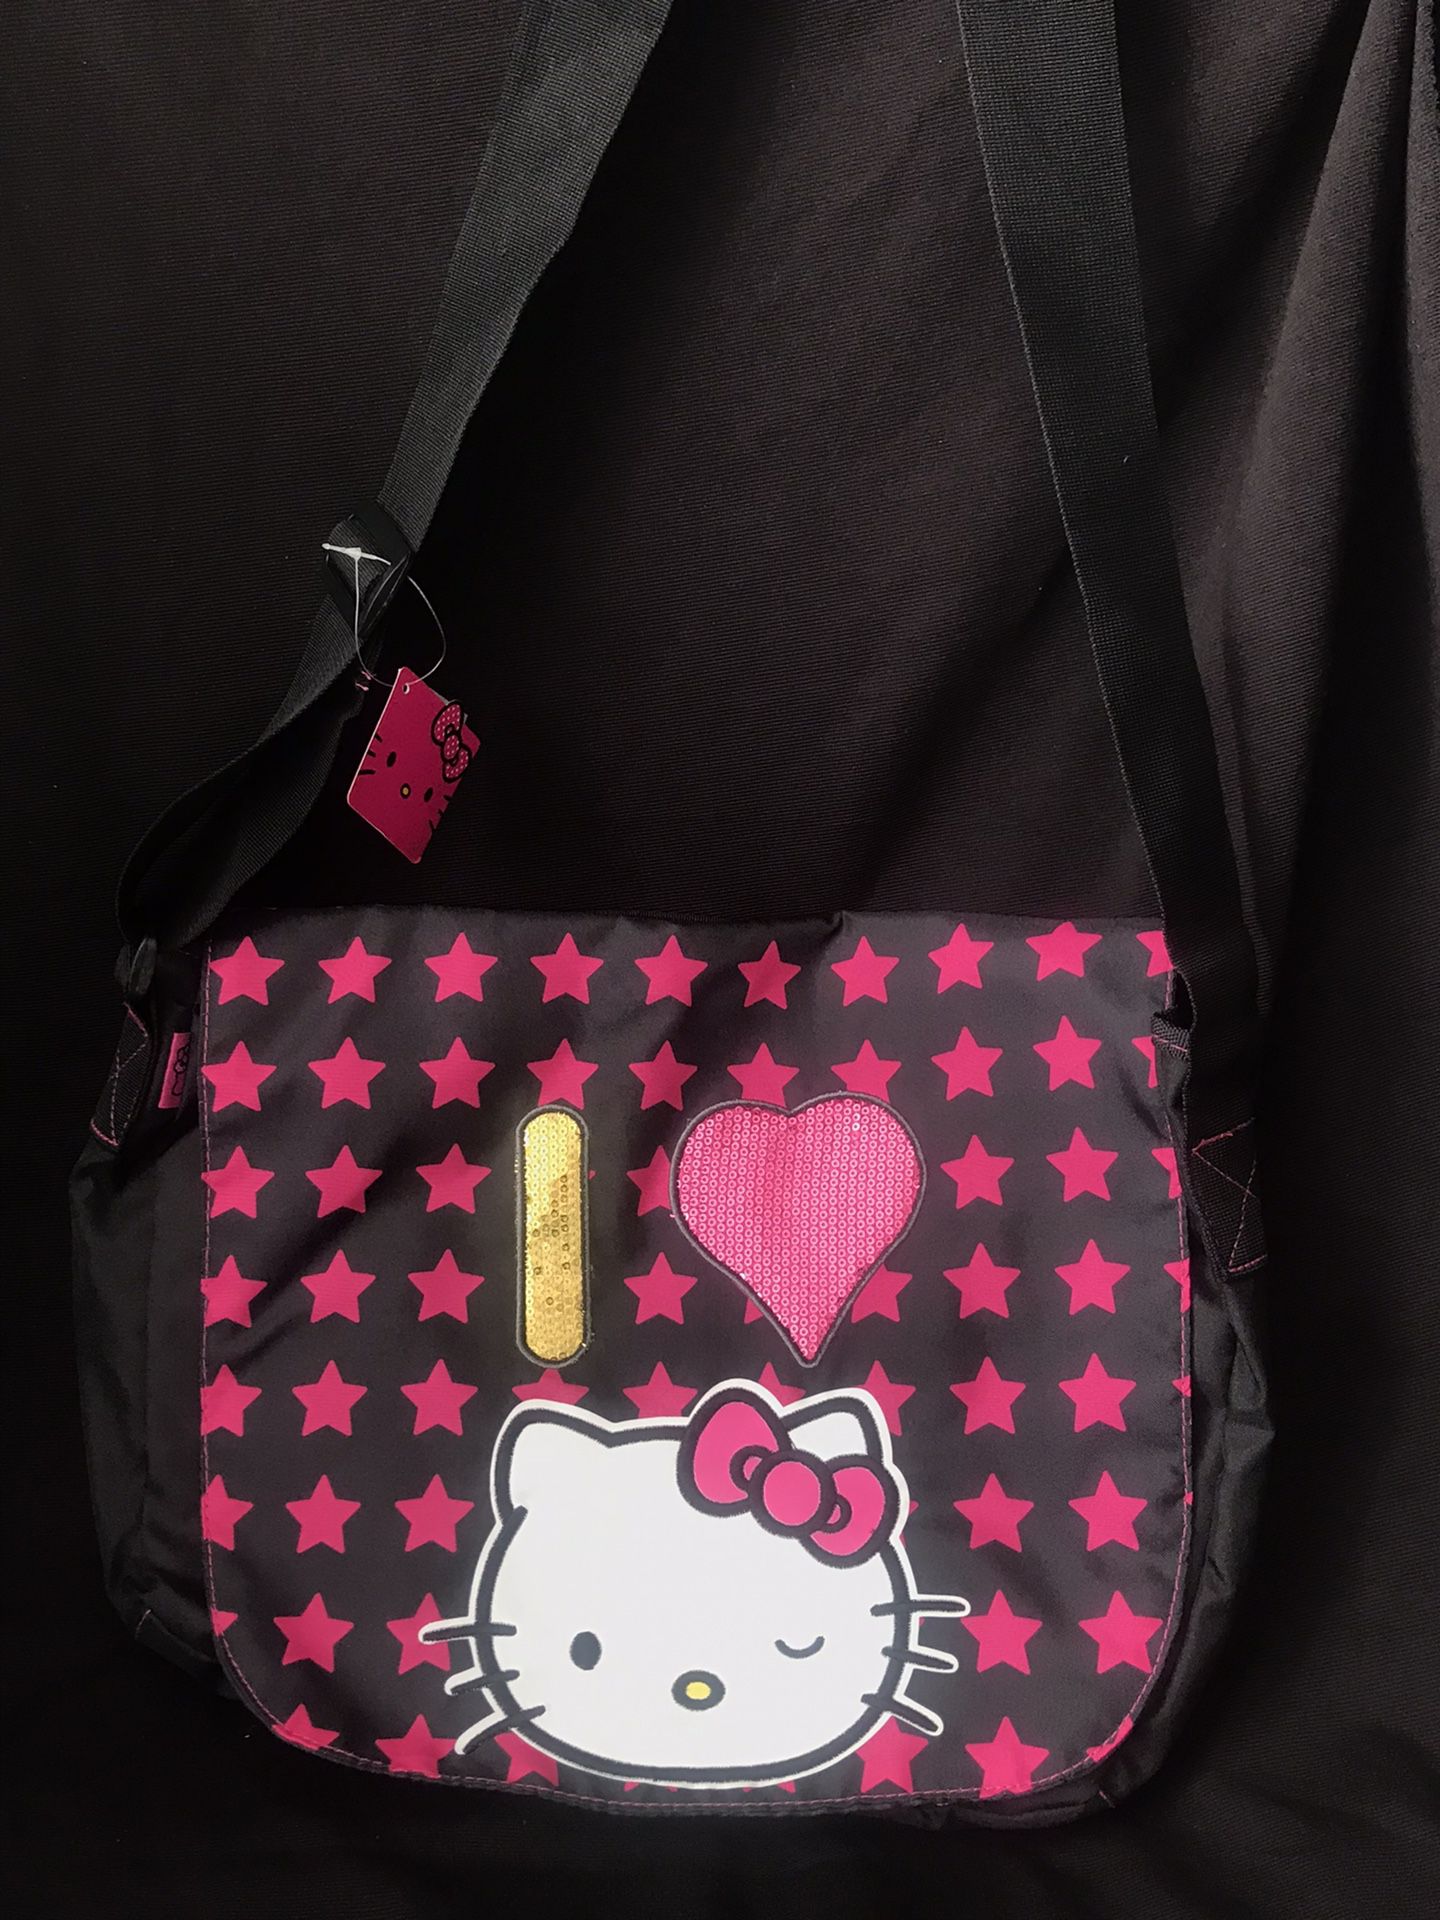 Adorable Hello Kitty Messenger Bag for Sale in Queens, NY - OfferUp